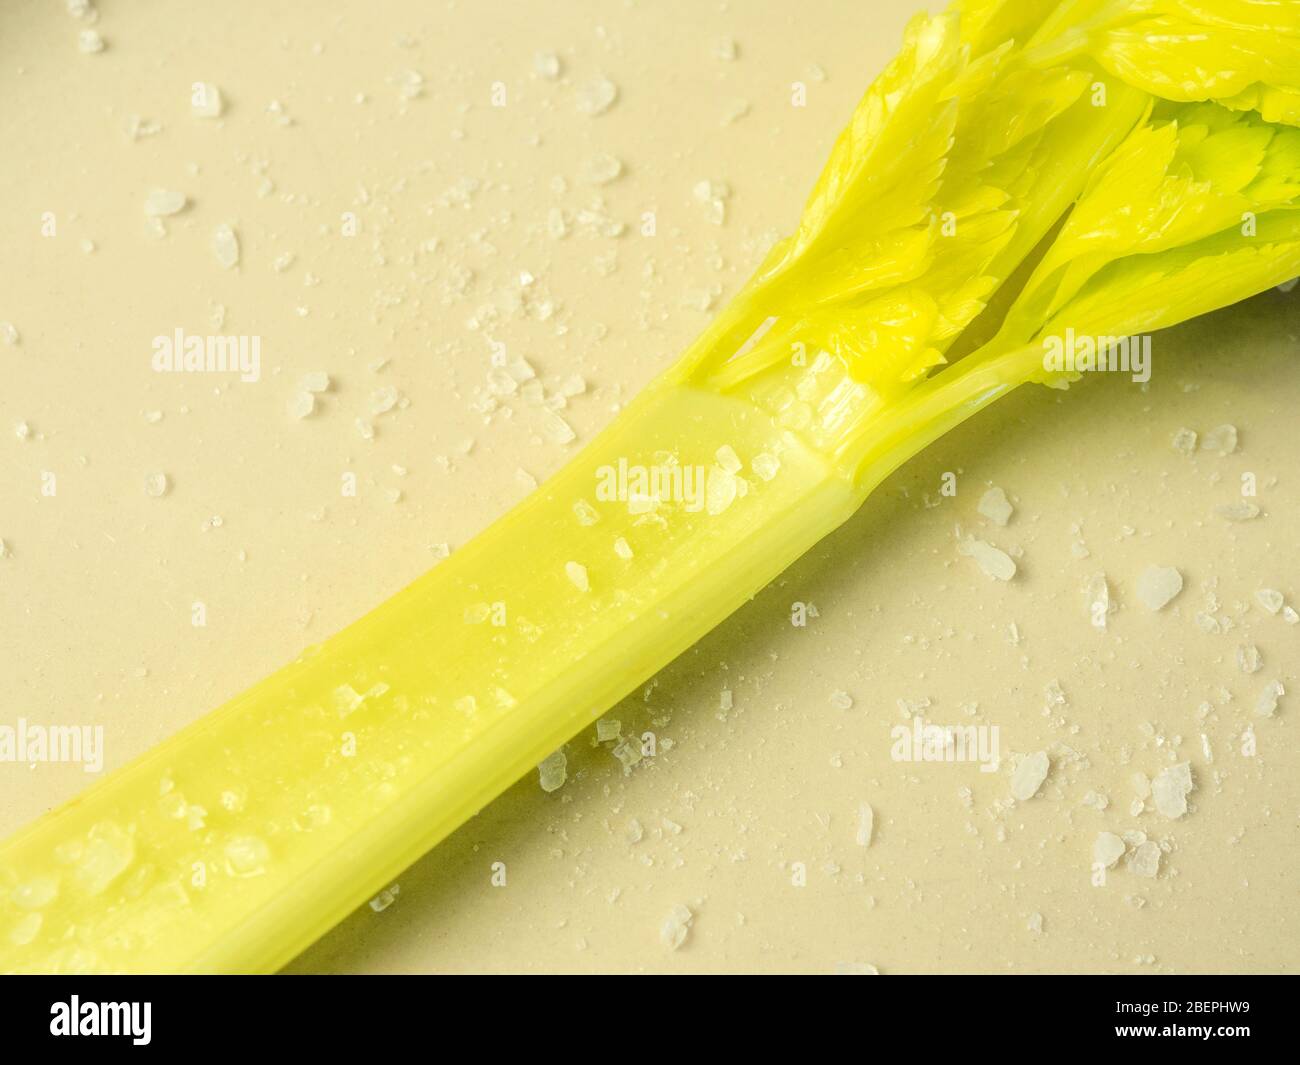 A single stick of celery on a plate with freshly milled sea salt Stock Photo